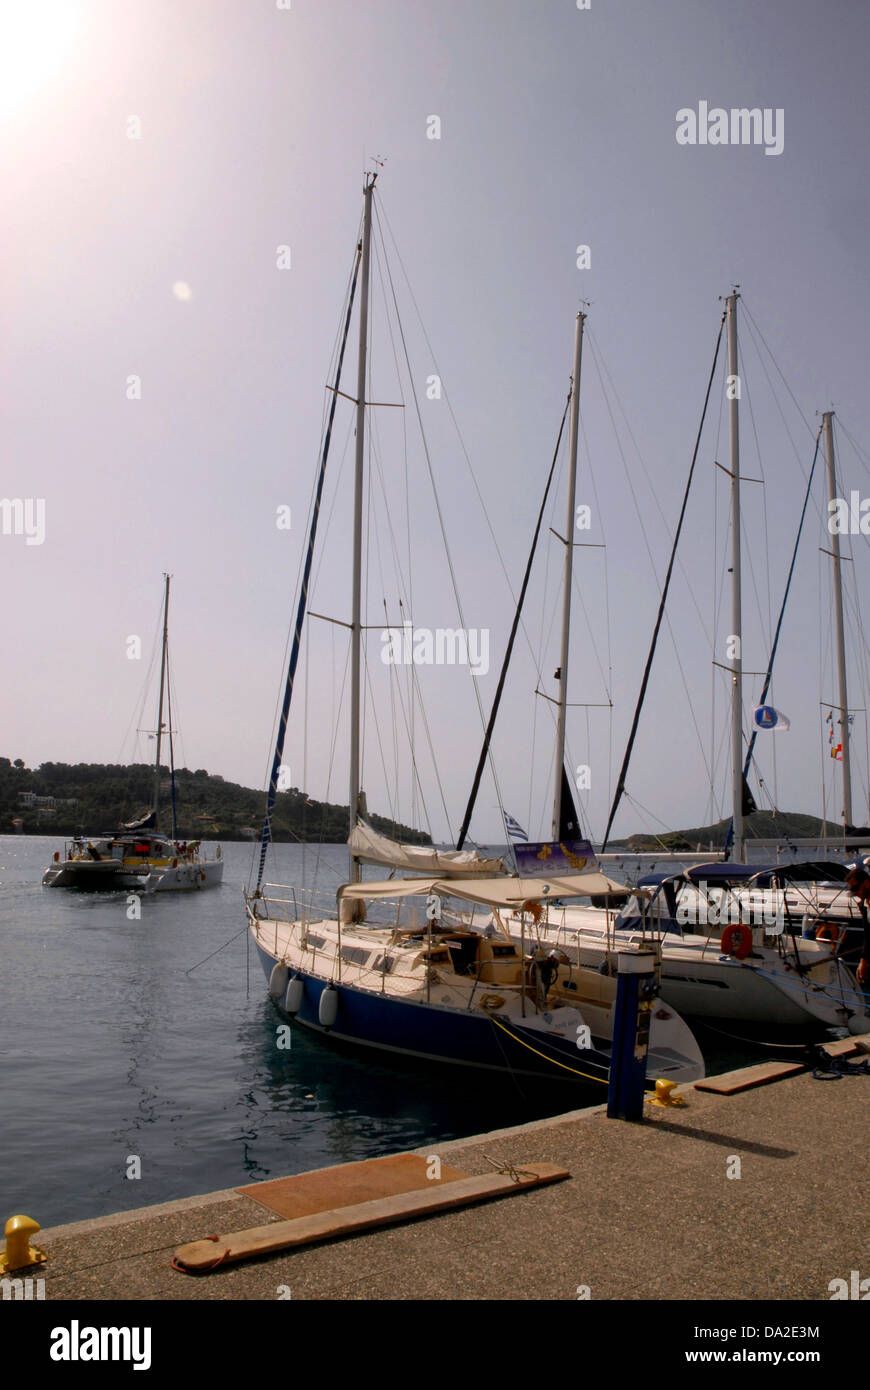 Yachts in Harbour, Sailing boats in Harbour, Greece. Stock Photo